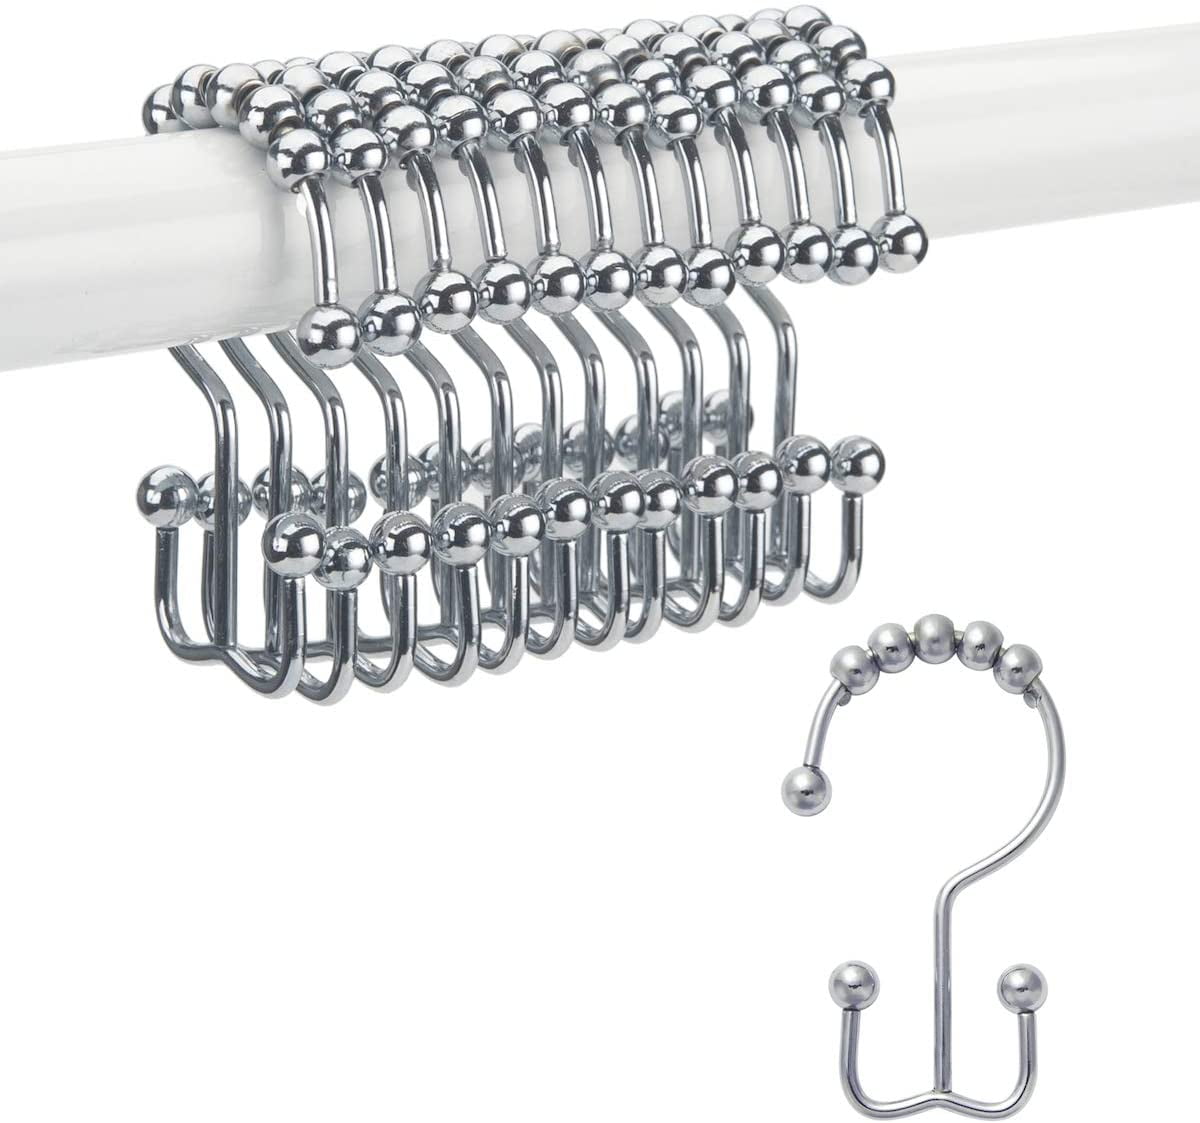 Woven Bathroom Shower Curtain Tension Rod and Hook Set w 12 hooks 44-72 inch 